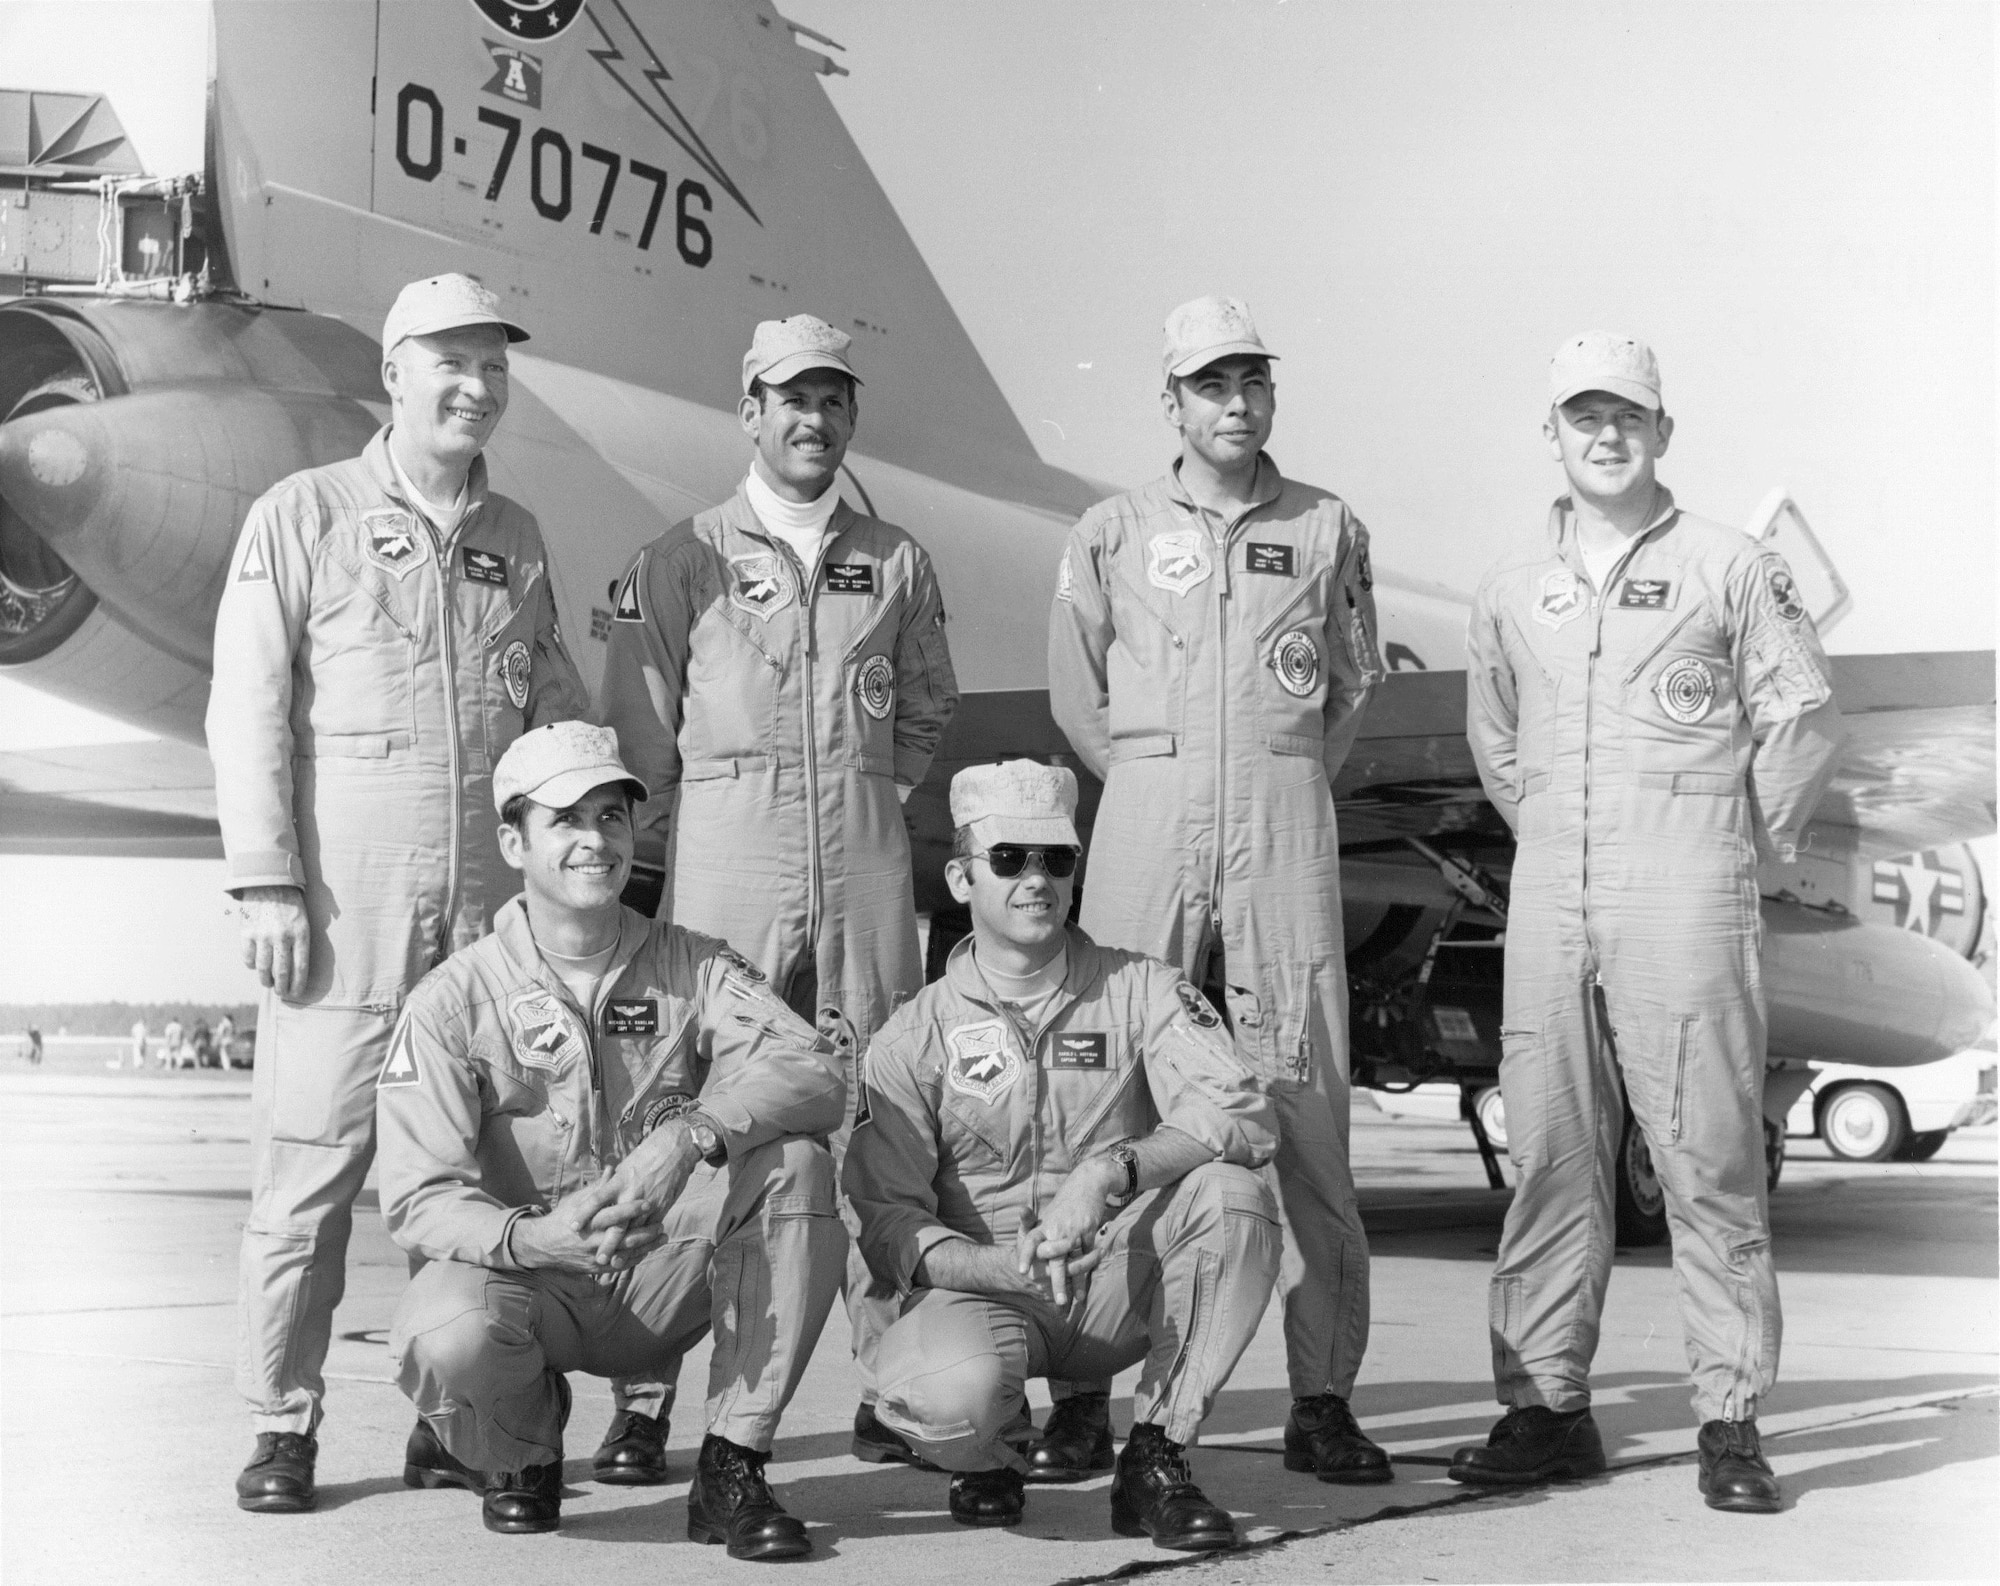 Pilots of the Oregon ANG’s 142nd Fighter Group William Tell 1970 team pose for a photo by the group commander’s F-102 Delta Dagger fighter-interceptor.  Standing, from left to right, are 142nd FG Commander Colonel Patrick E. O’Grady, Major William B. McDonald, Major Jimmy K. Angel and Captain Robert M. Parker.  Kneeling, left to right, are Captain Michael E. Ranslam and Captain Harold L. Hoffman.  (142nd Fighter Wing History Archives)